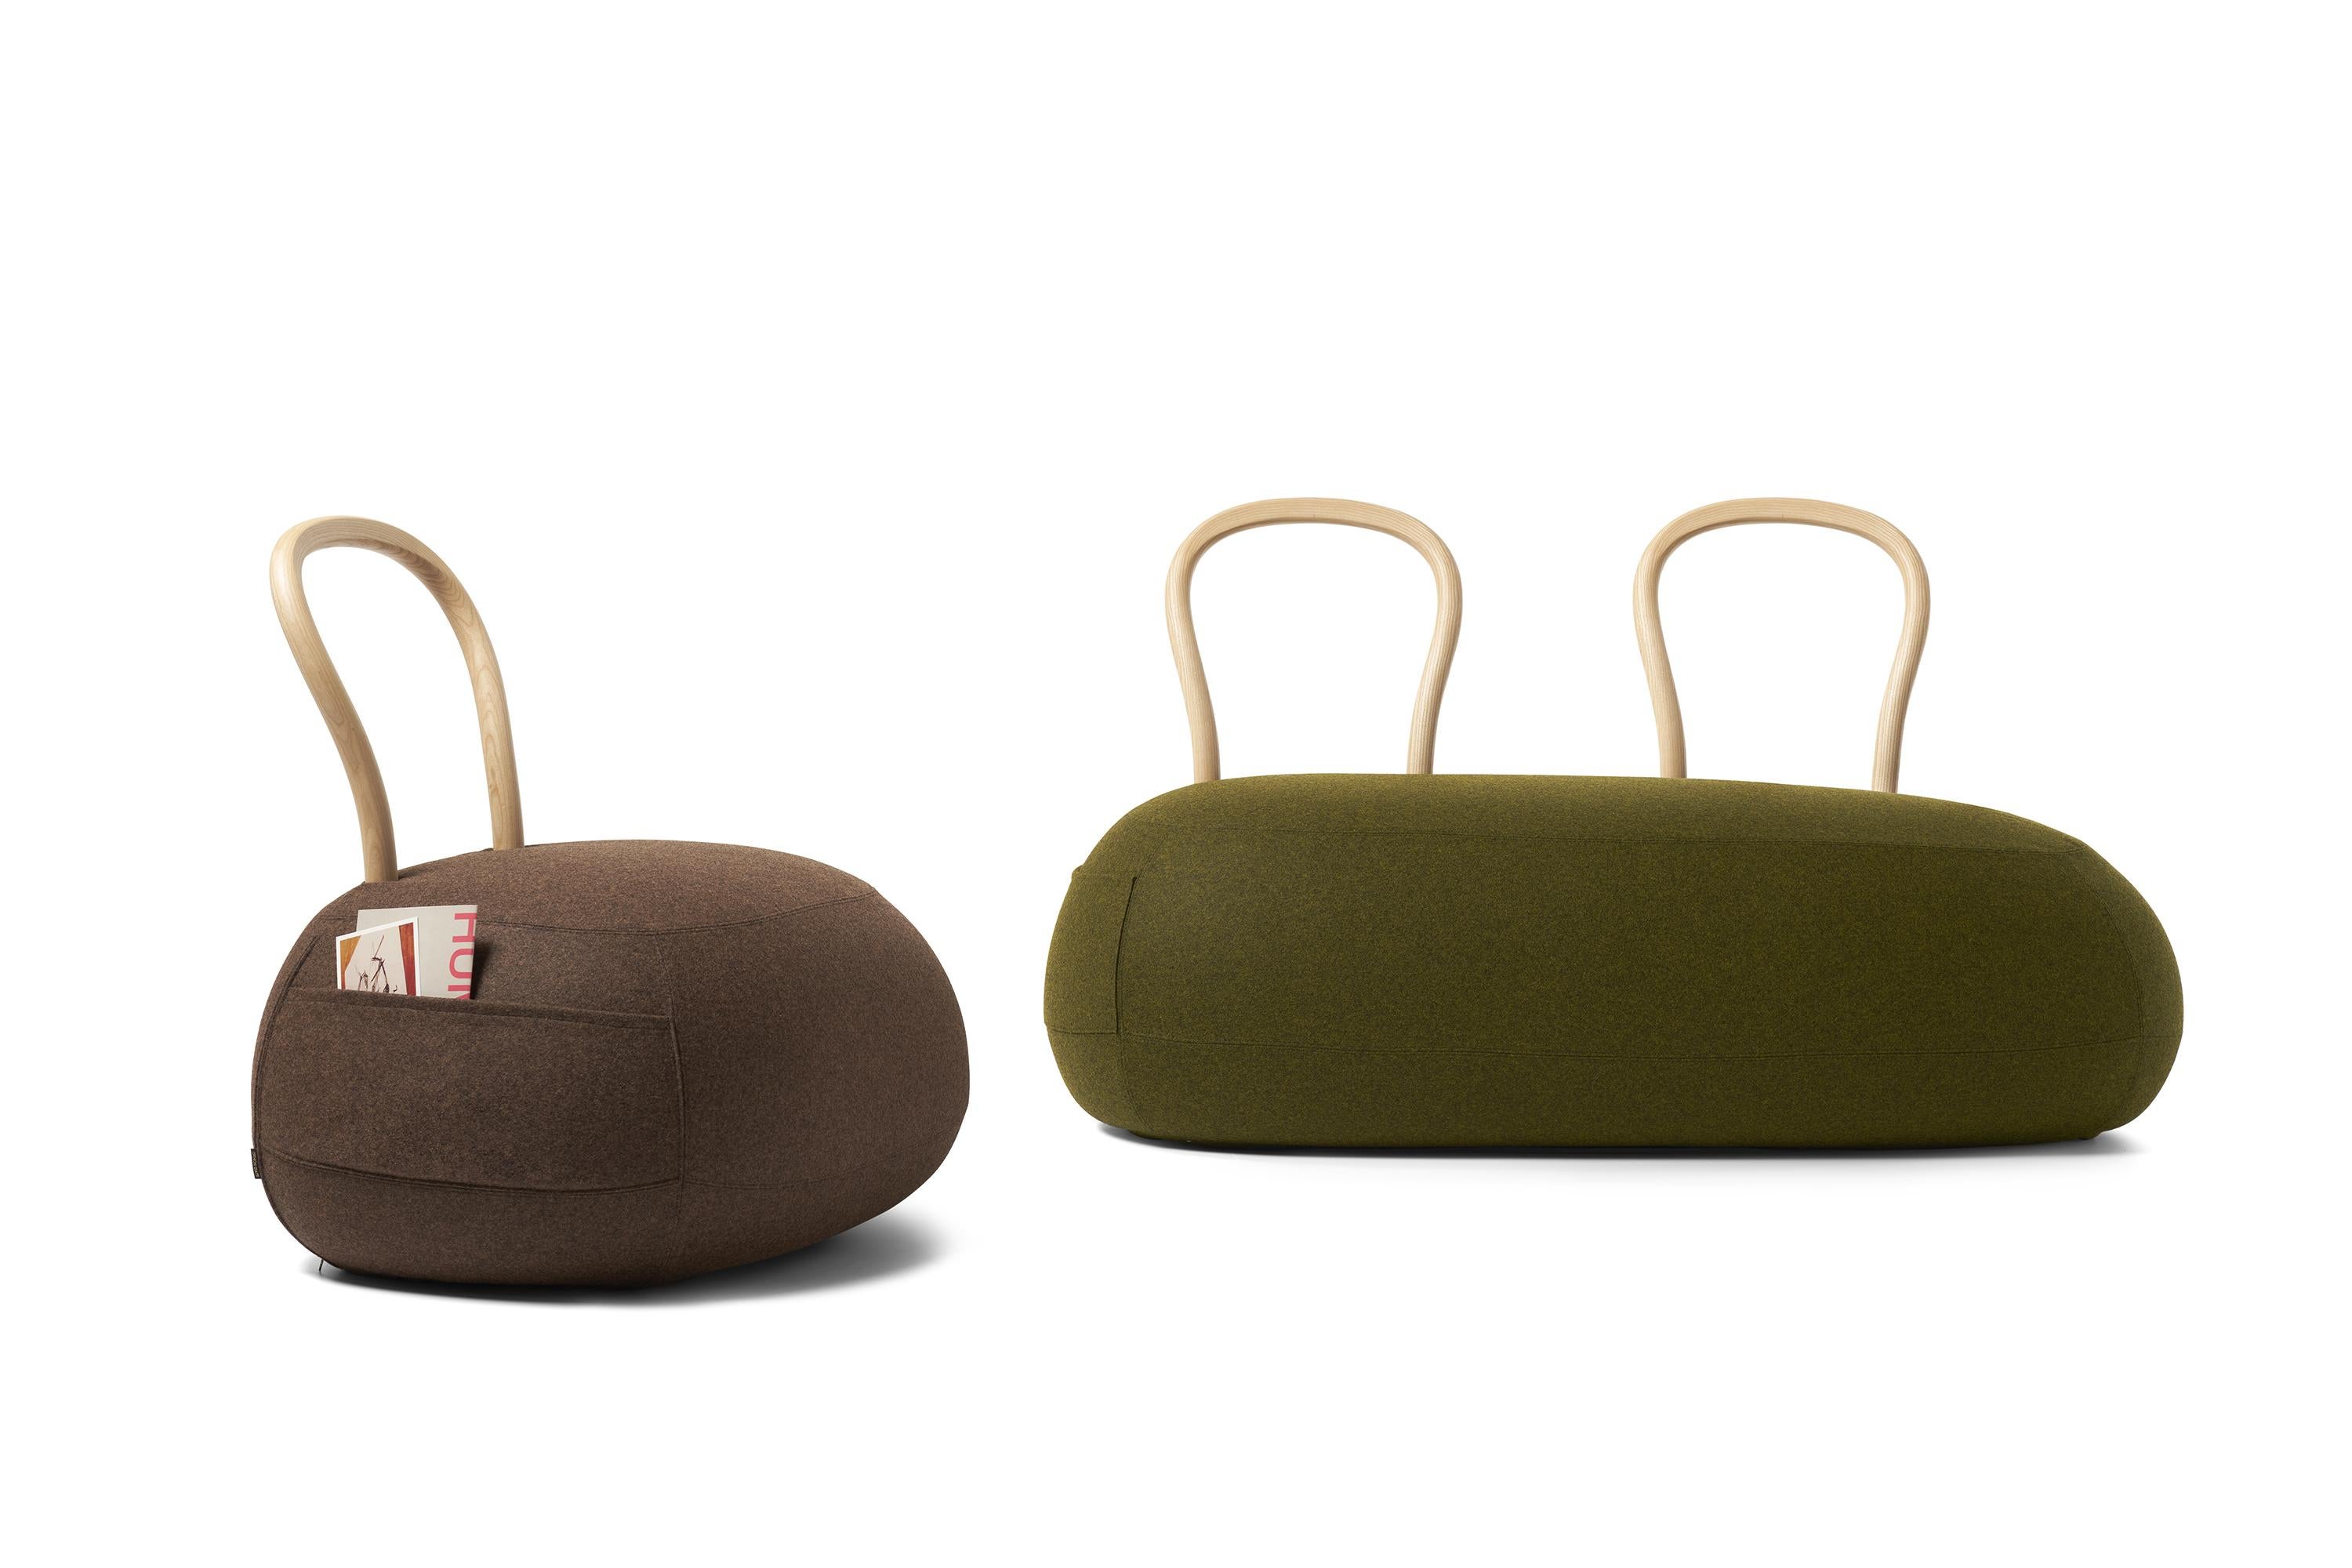 The Yum Yum seating collection has an answer for all this and even more. It is a sum of opposites, and as such, utterly charming.

Yum Yum is a pouf with a backrest, precisely a soft padded pouf with a strong wooden backrest. But it is also a